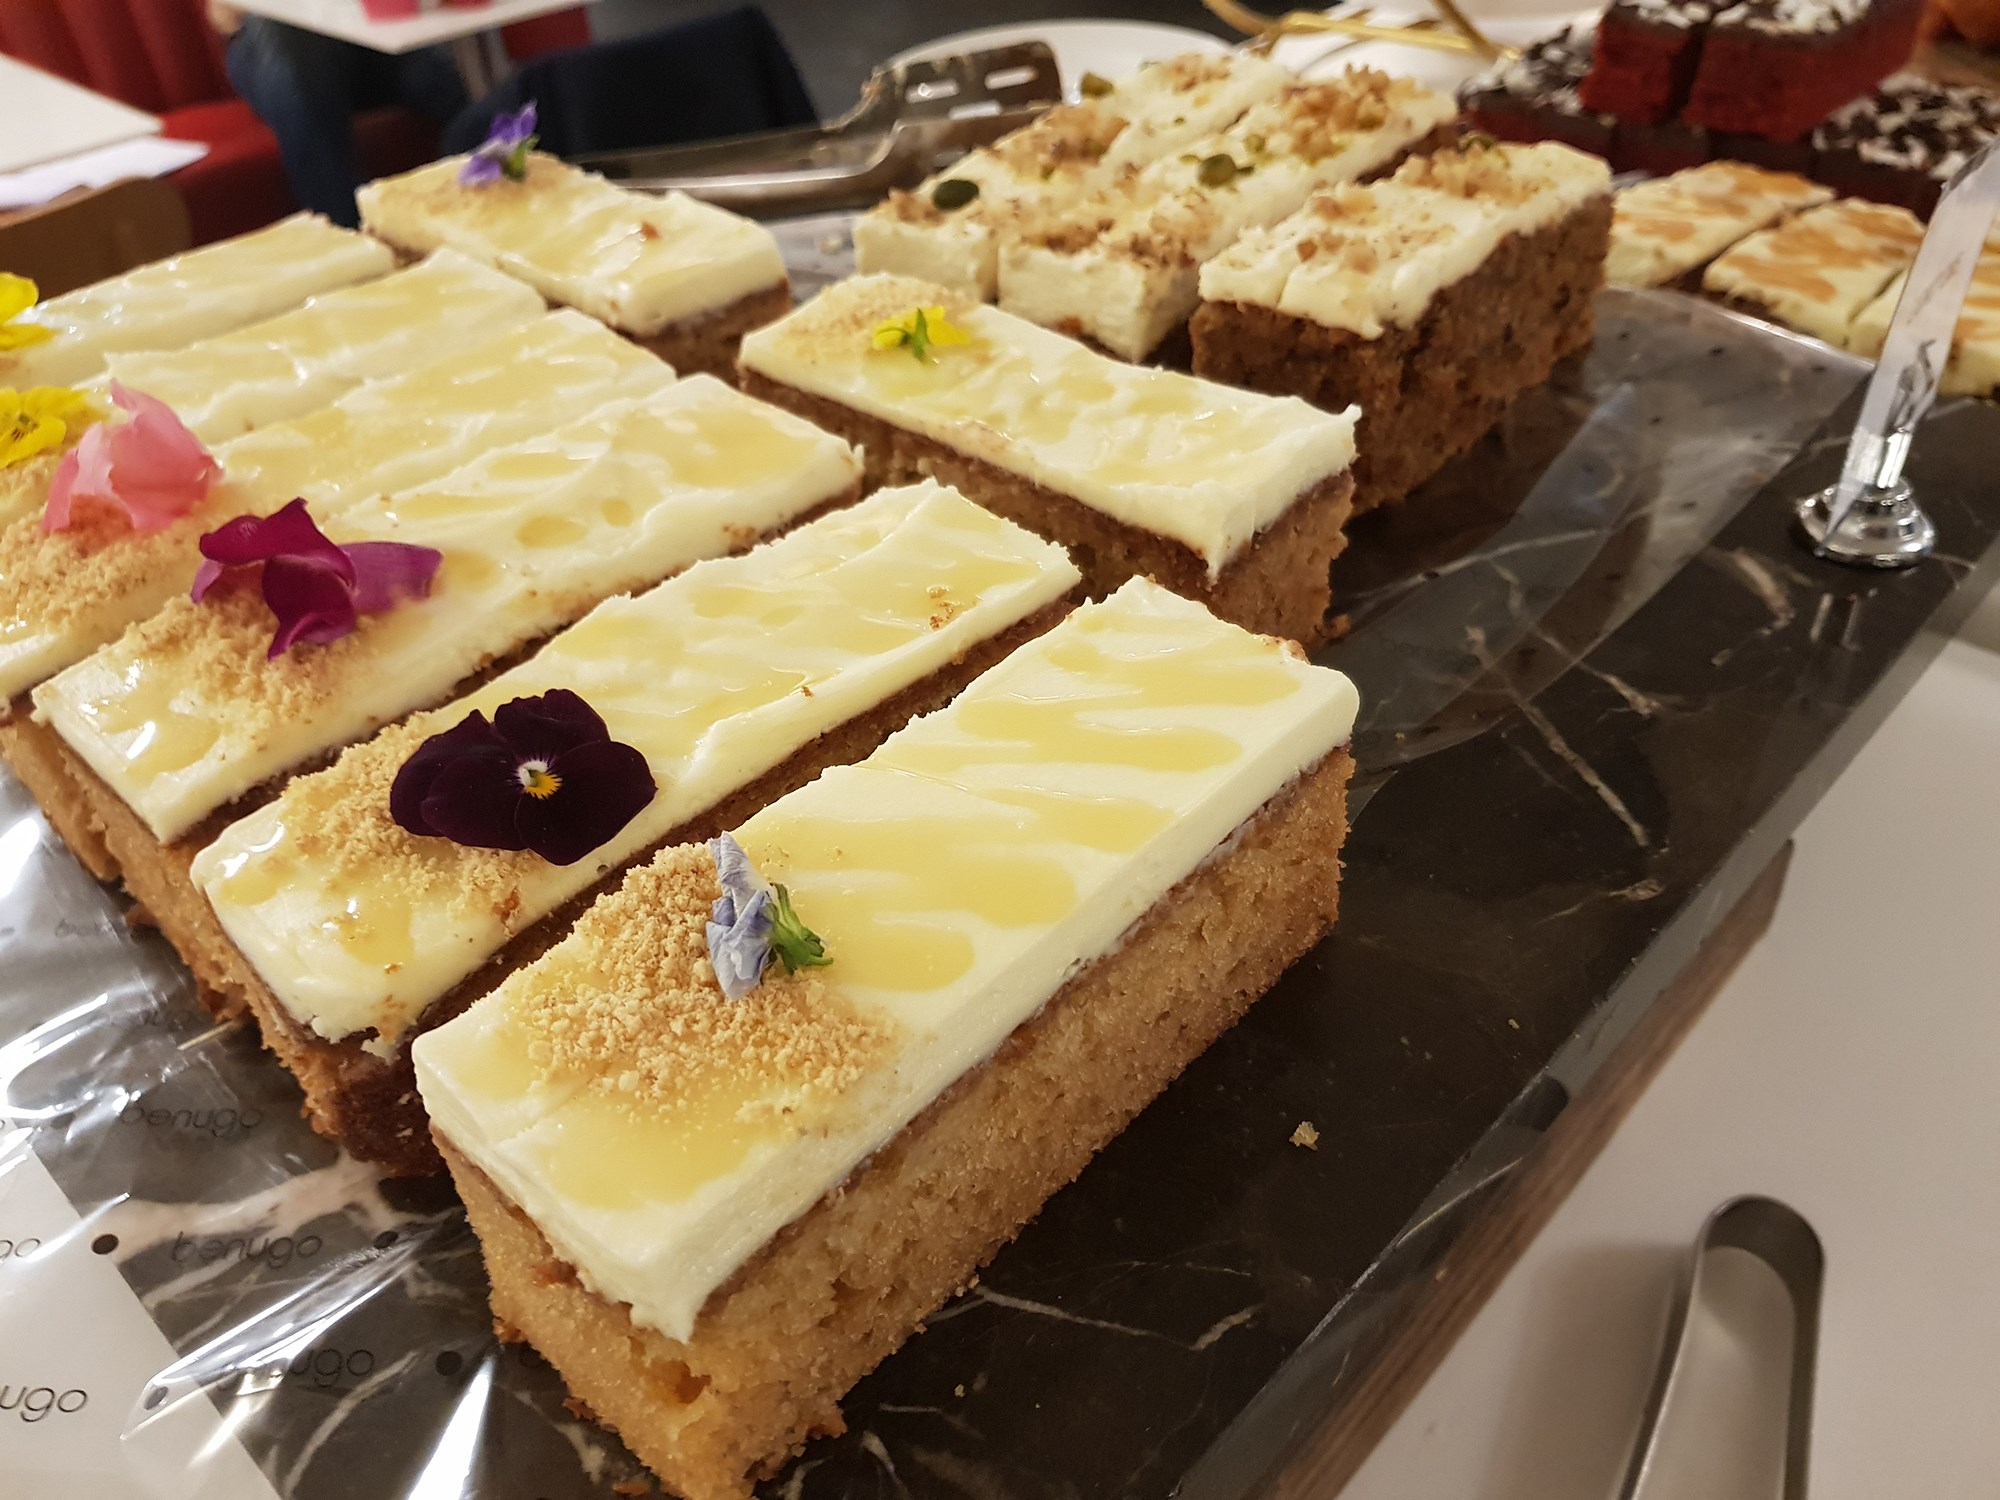 Rectangles of yellow cake with white icing and floral decorations